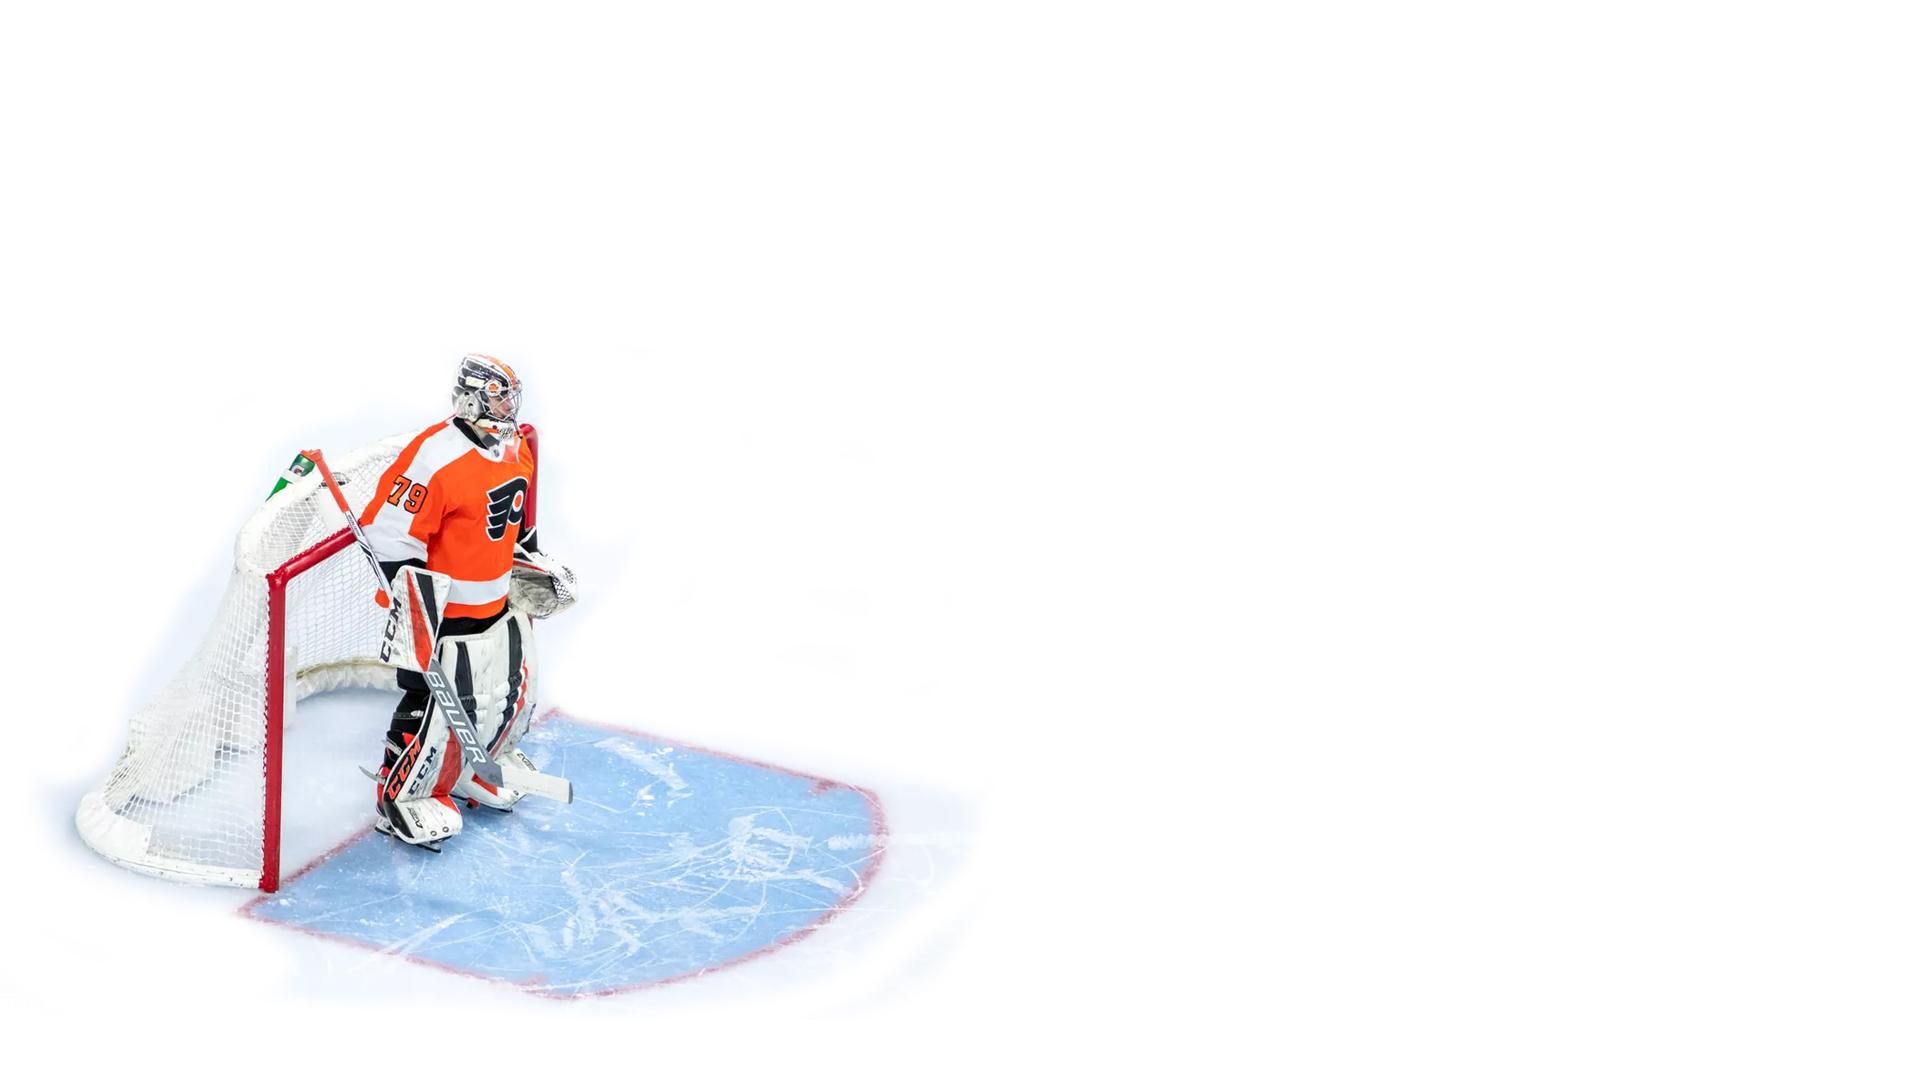 Noticed the lack of Carter Hart Wallpaper. Whipped this up real